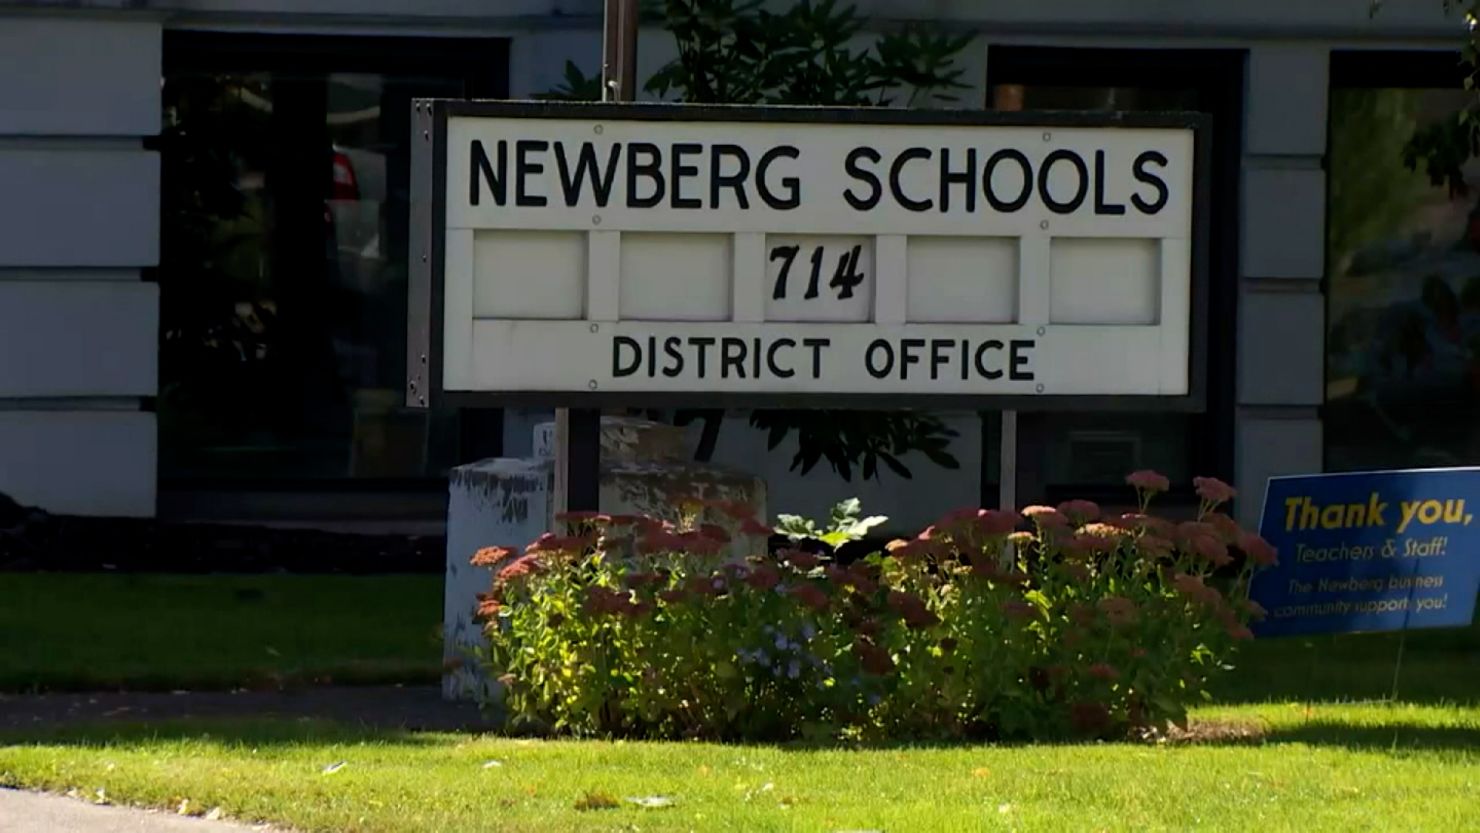 Newberg Public Schools has been involved in several incidents regarding race and equality in recent weeks, including a proposed ban on controversial signs.